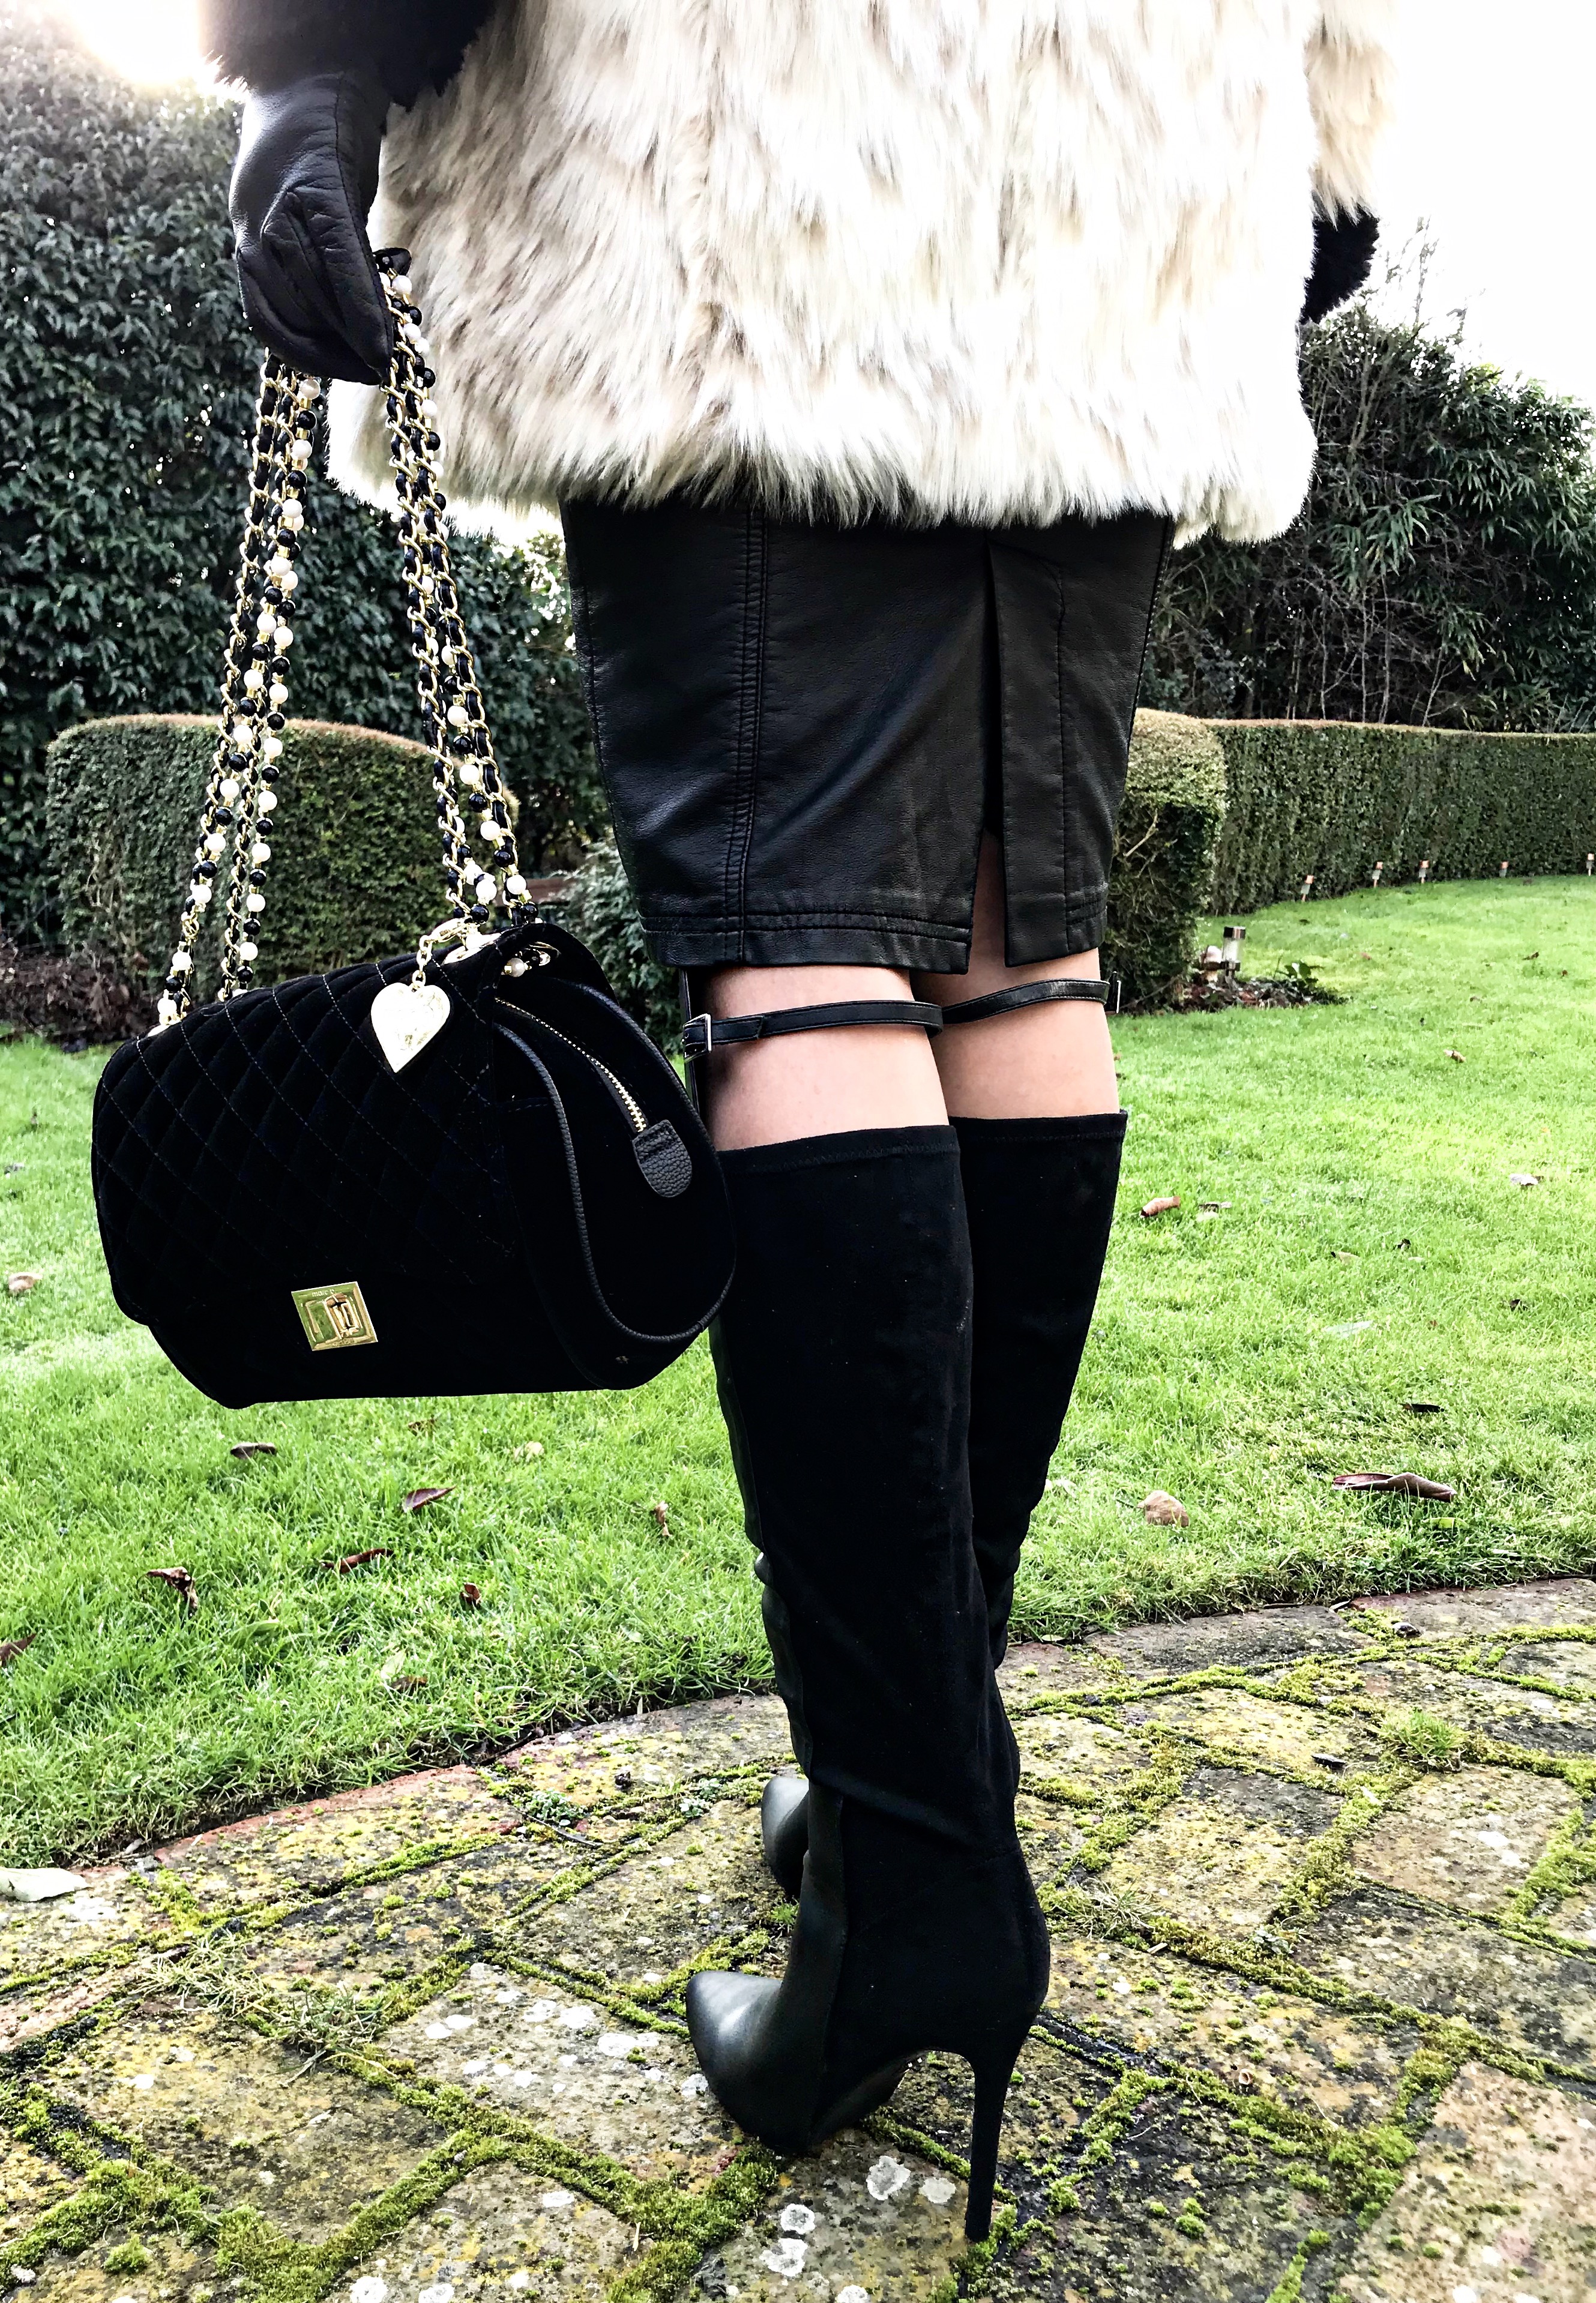 Marc B Quilted Velvet Cross Body | Lost Ink Panelled Knee High Boots | Lipsy Military Button Jumper | Lipsy Faux Fur Belted Coat | Swarovski earrings